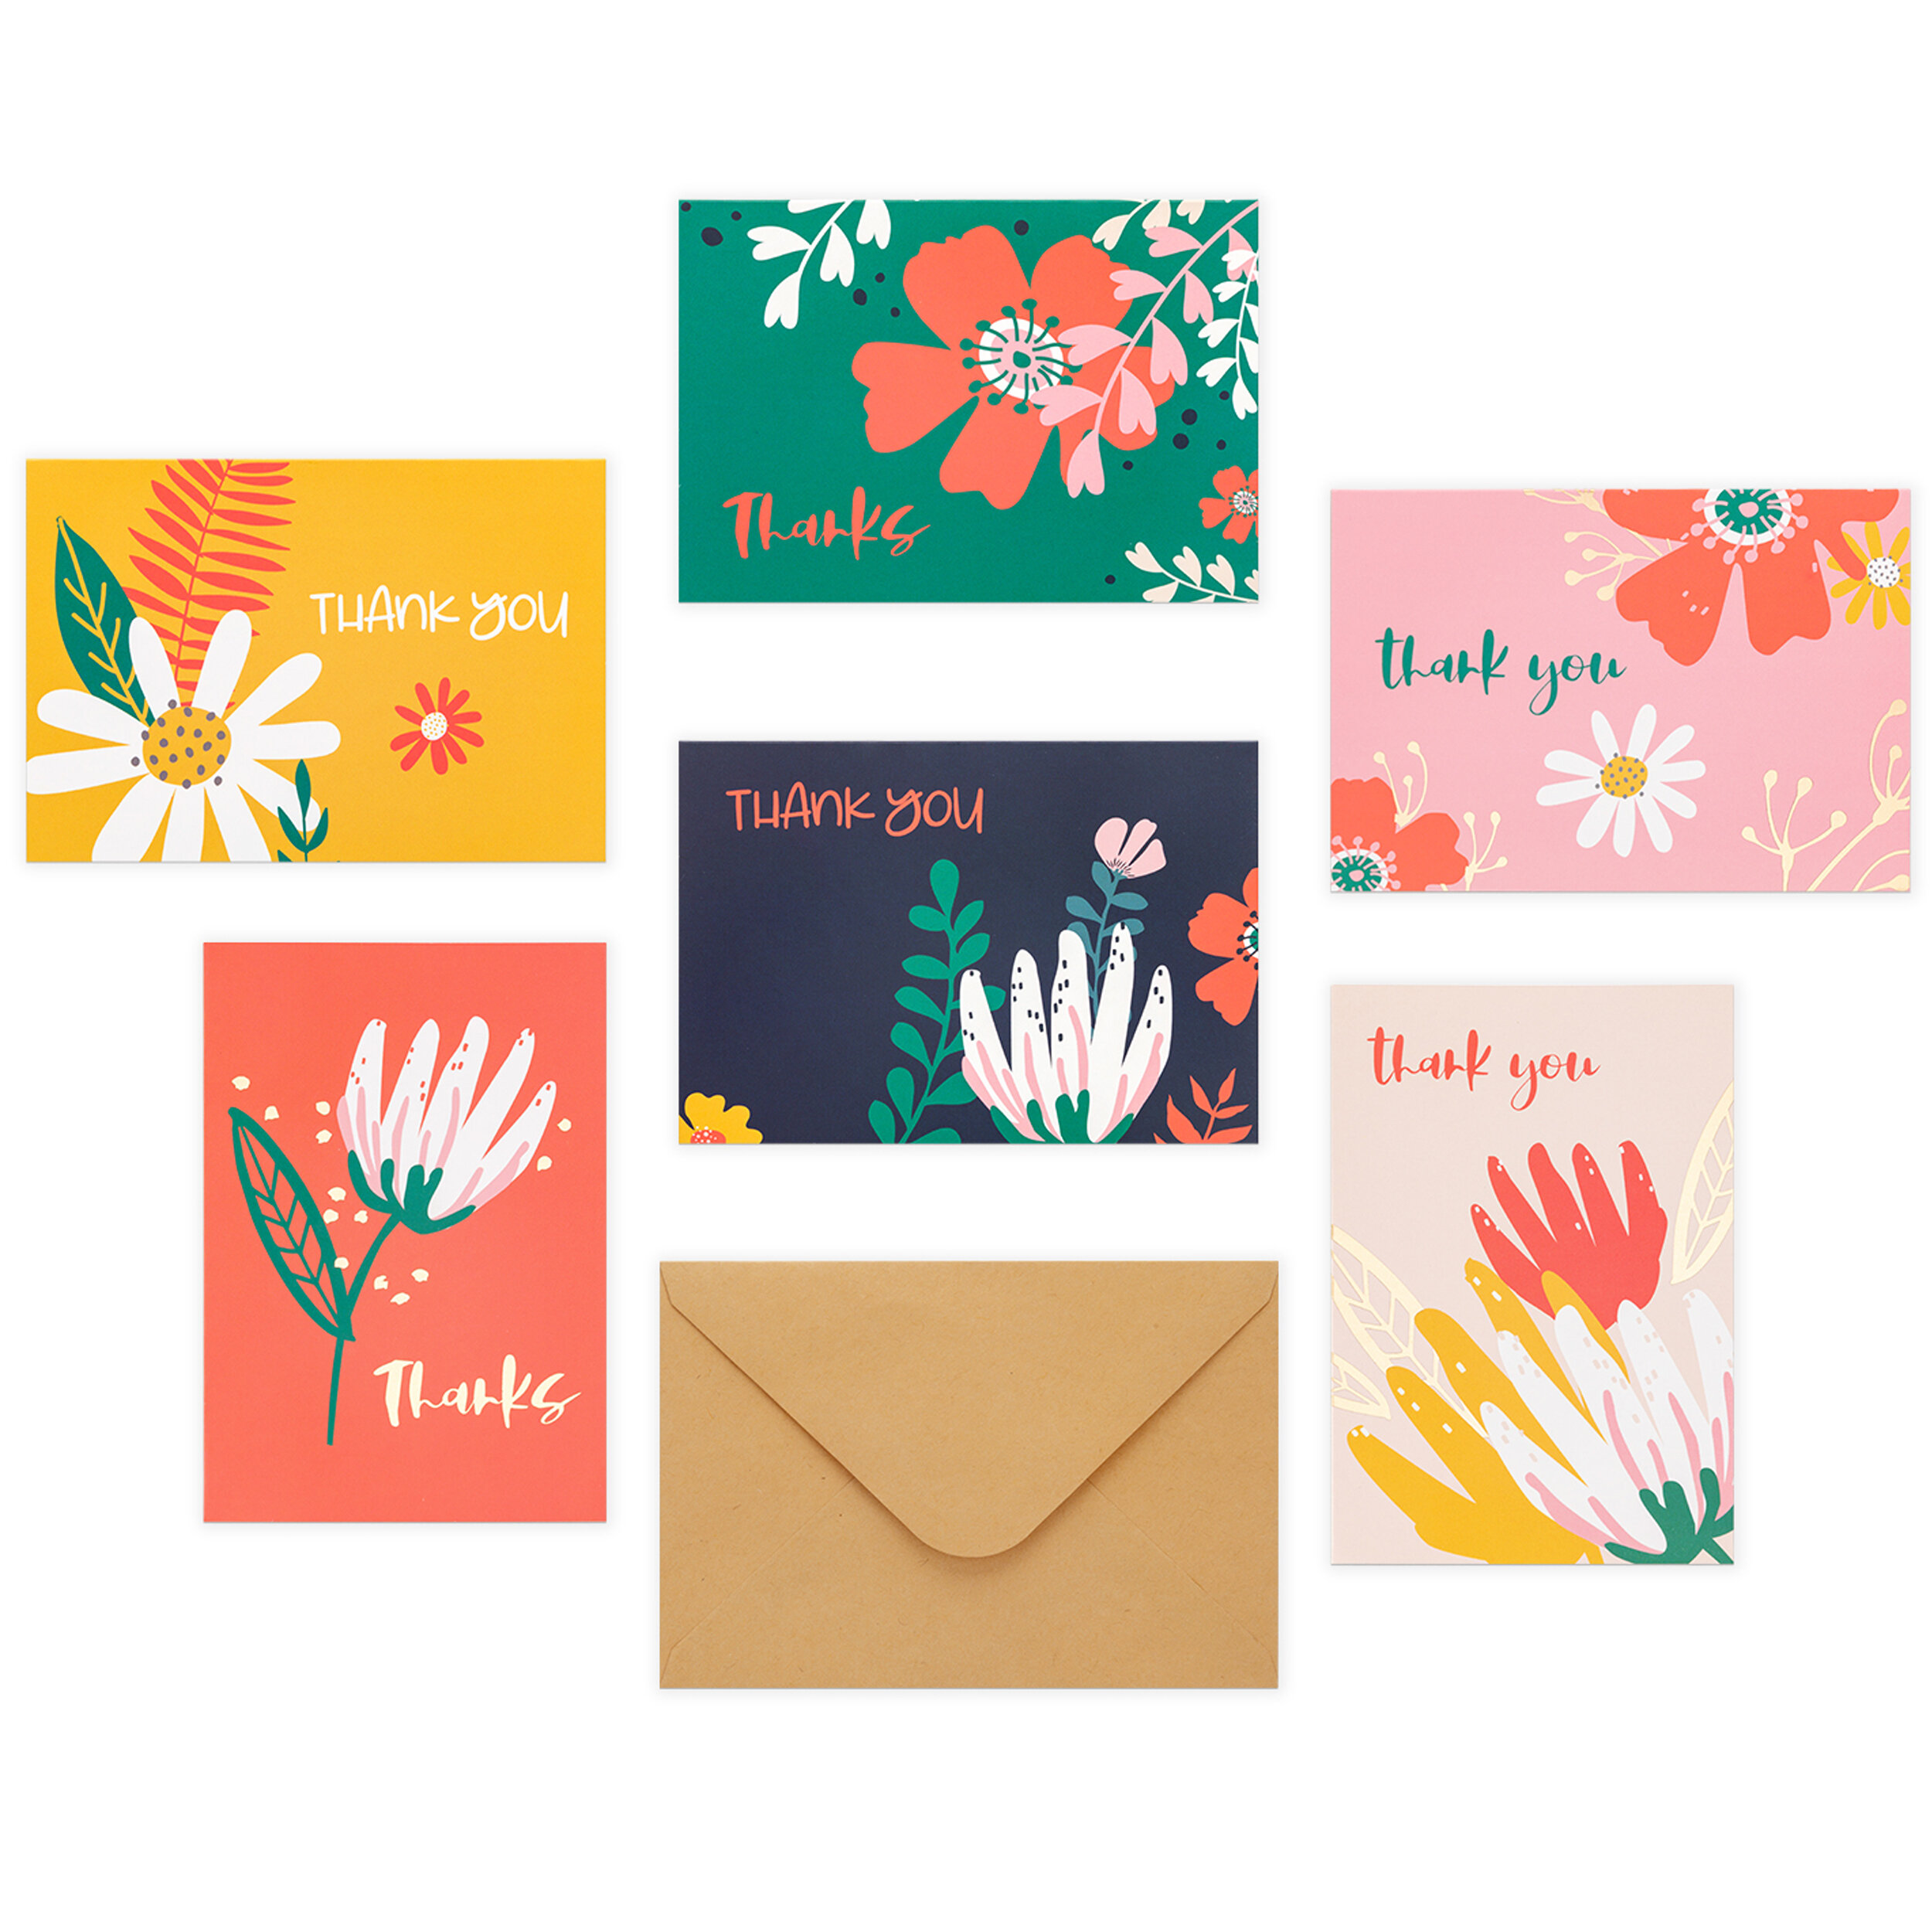 American Greetings Pineapple Blank Cards and Envelopes (#17), 10